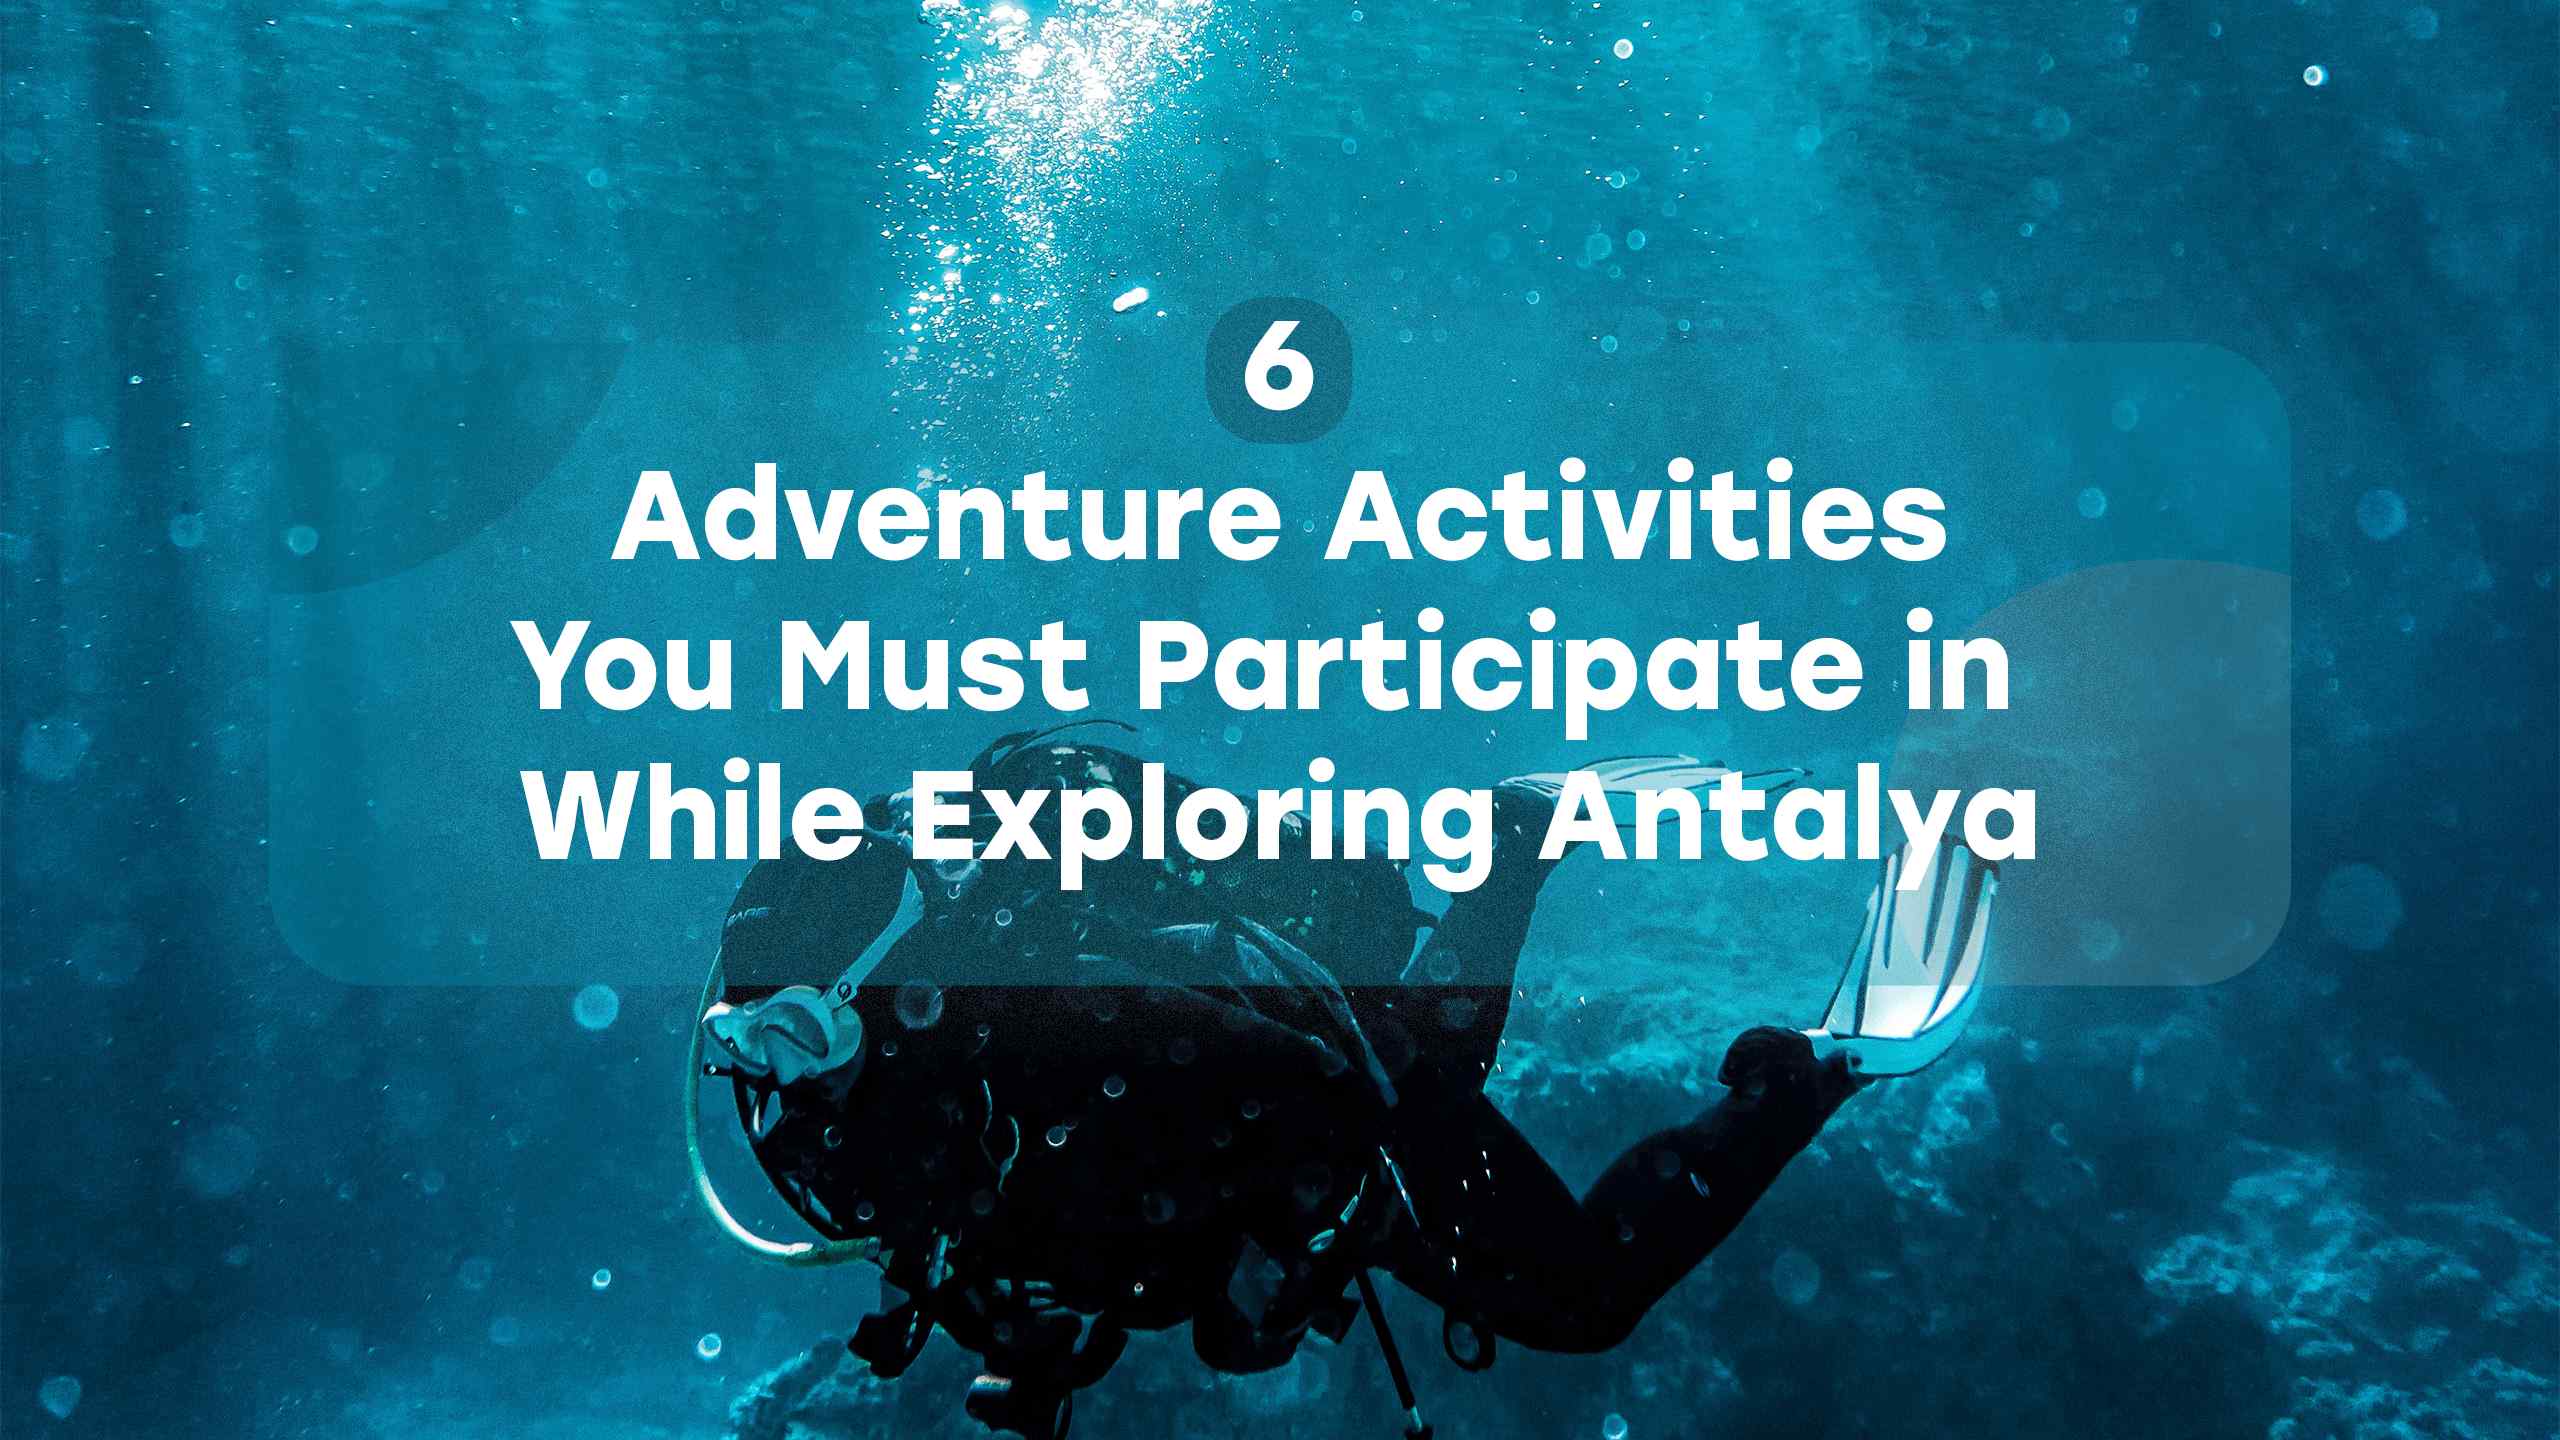 6 Adventure Activities You Must Participate in While Exploring Antalya Everytours